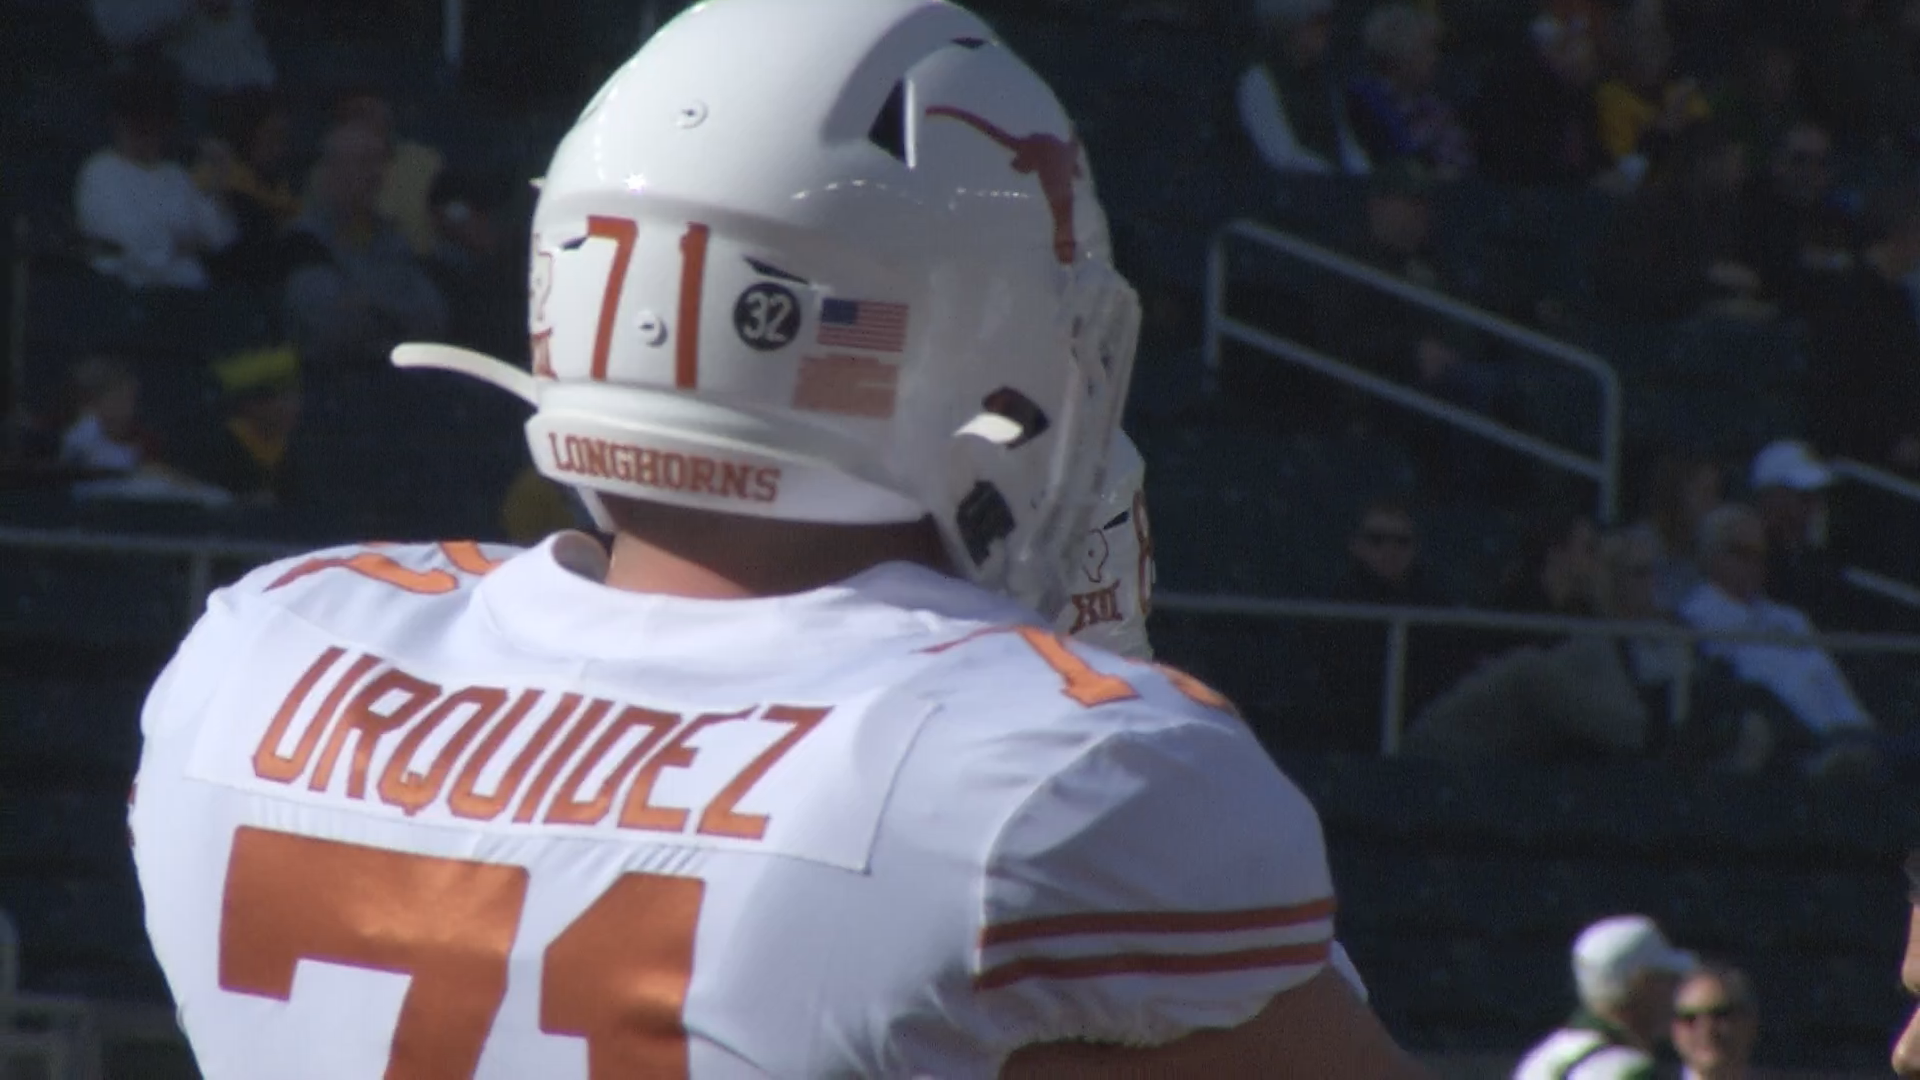 Urquidez signed with the Longhorns and enrolled in time for the 2016 season.